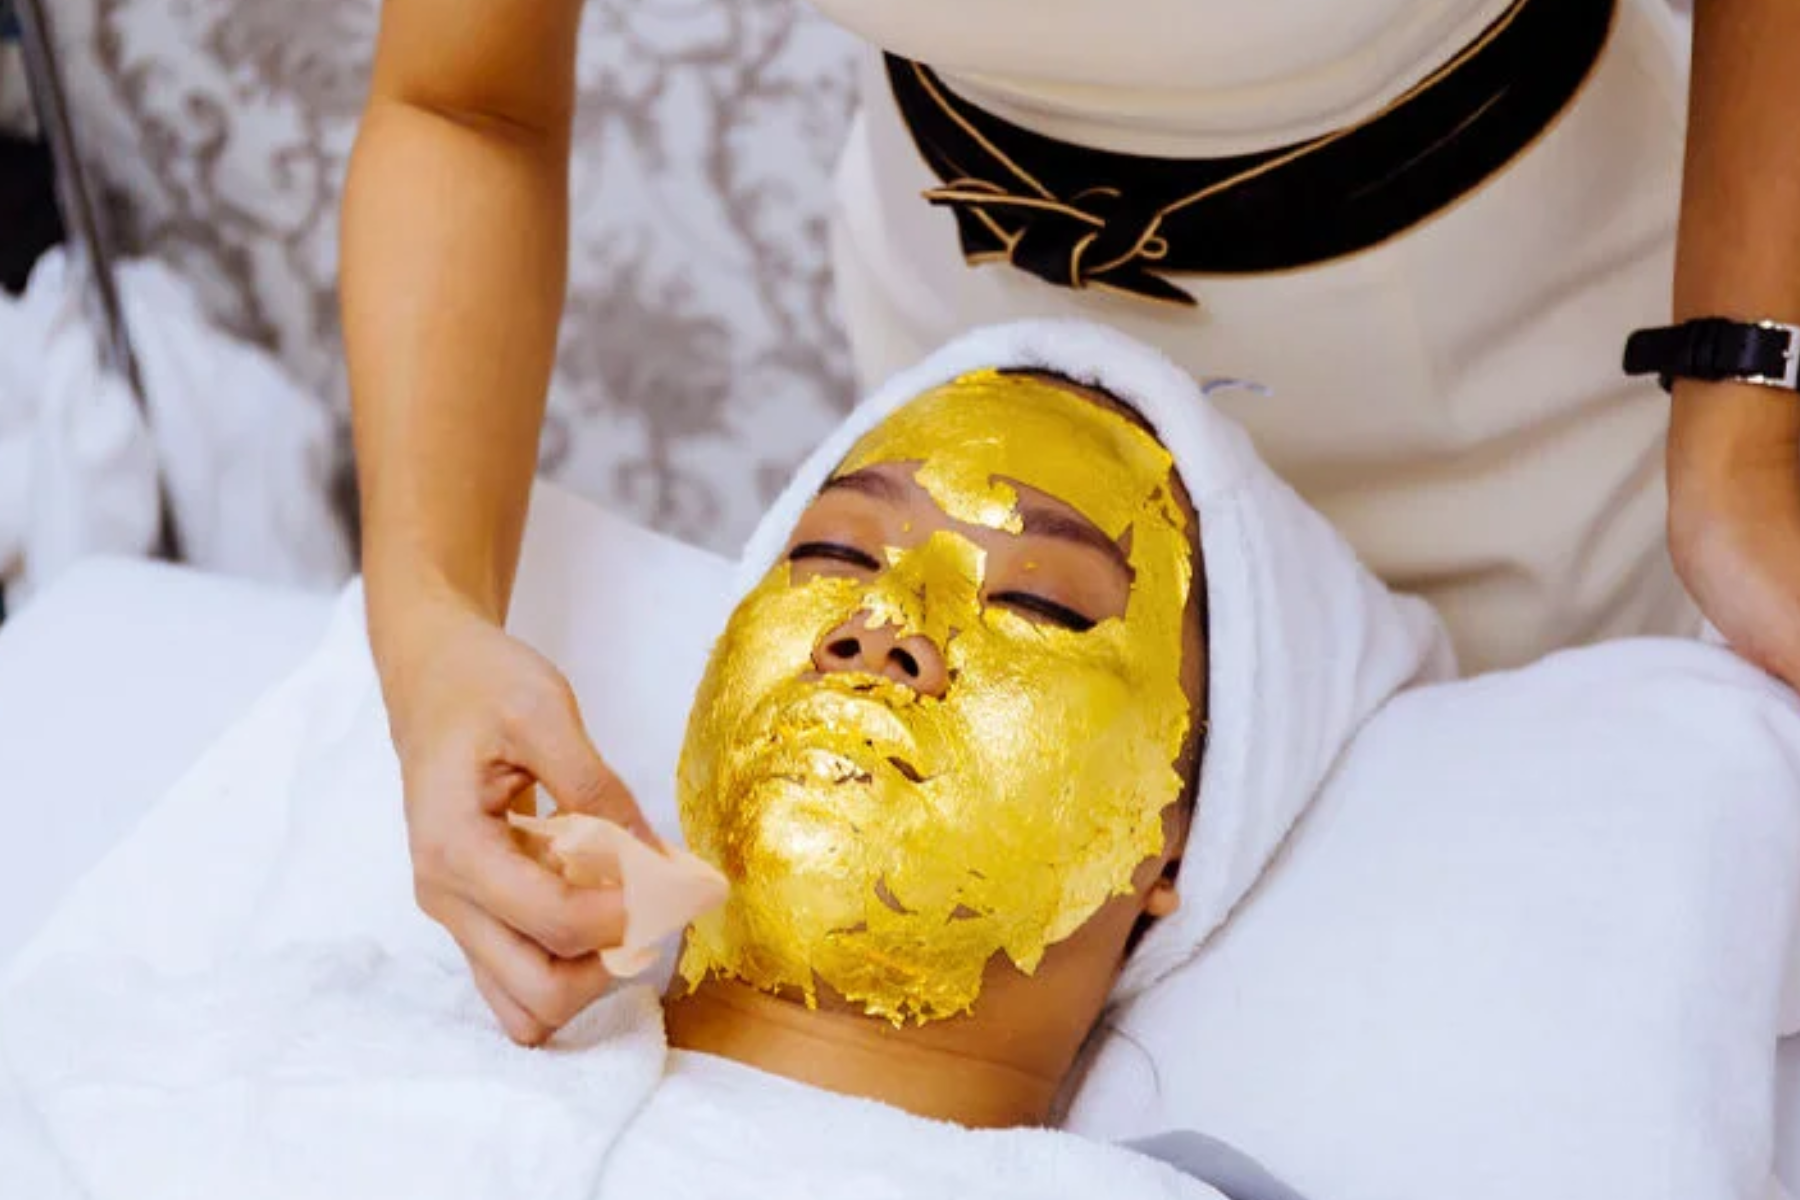 A woman receiving a facial treatment that includes gem-infused face masks